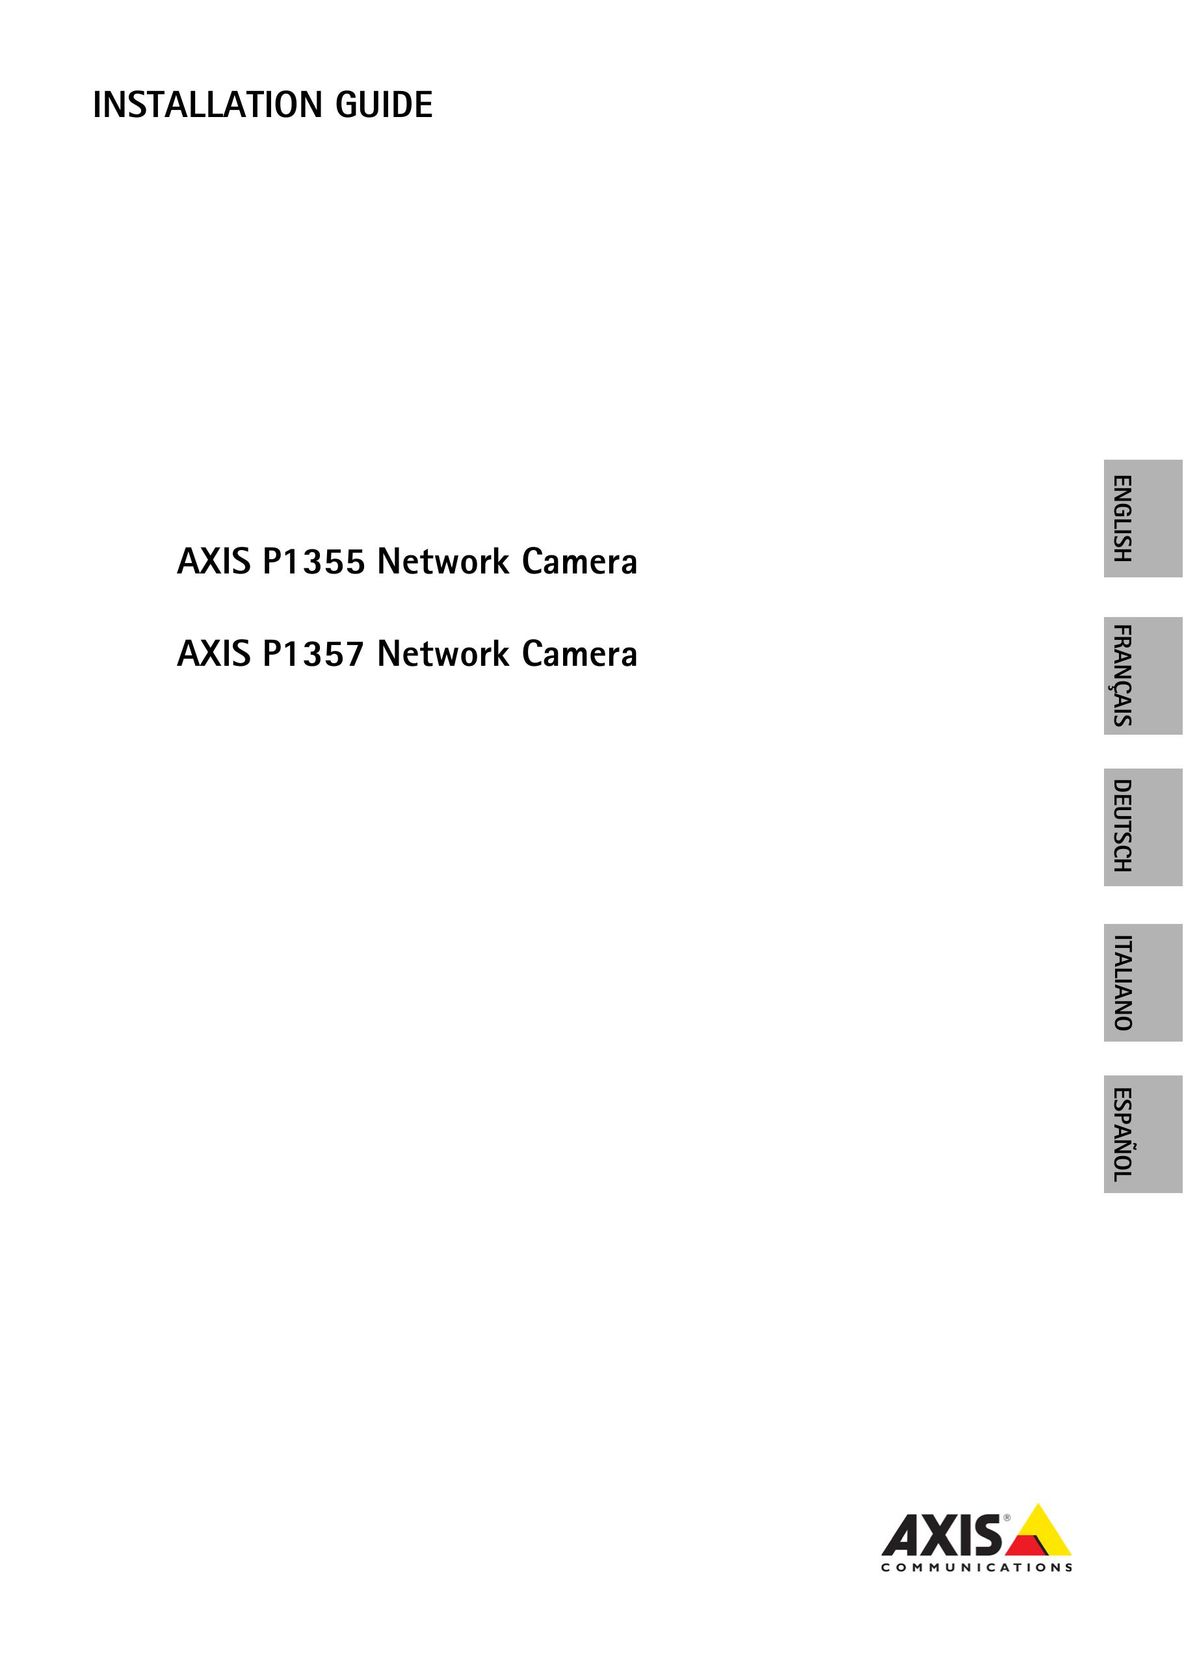 Axis Communications P1357 Webcam User Manual